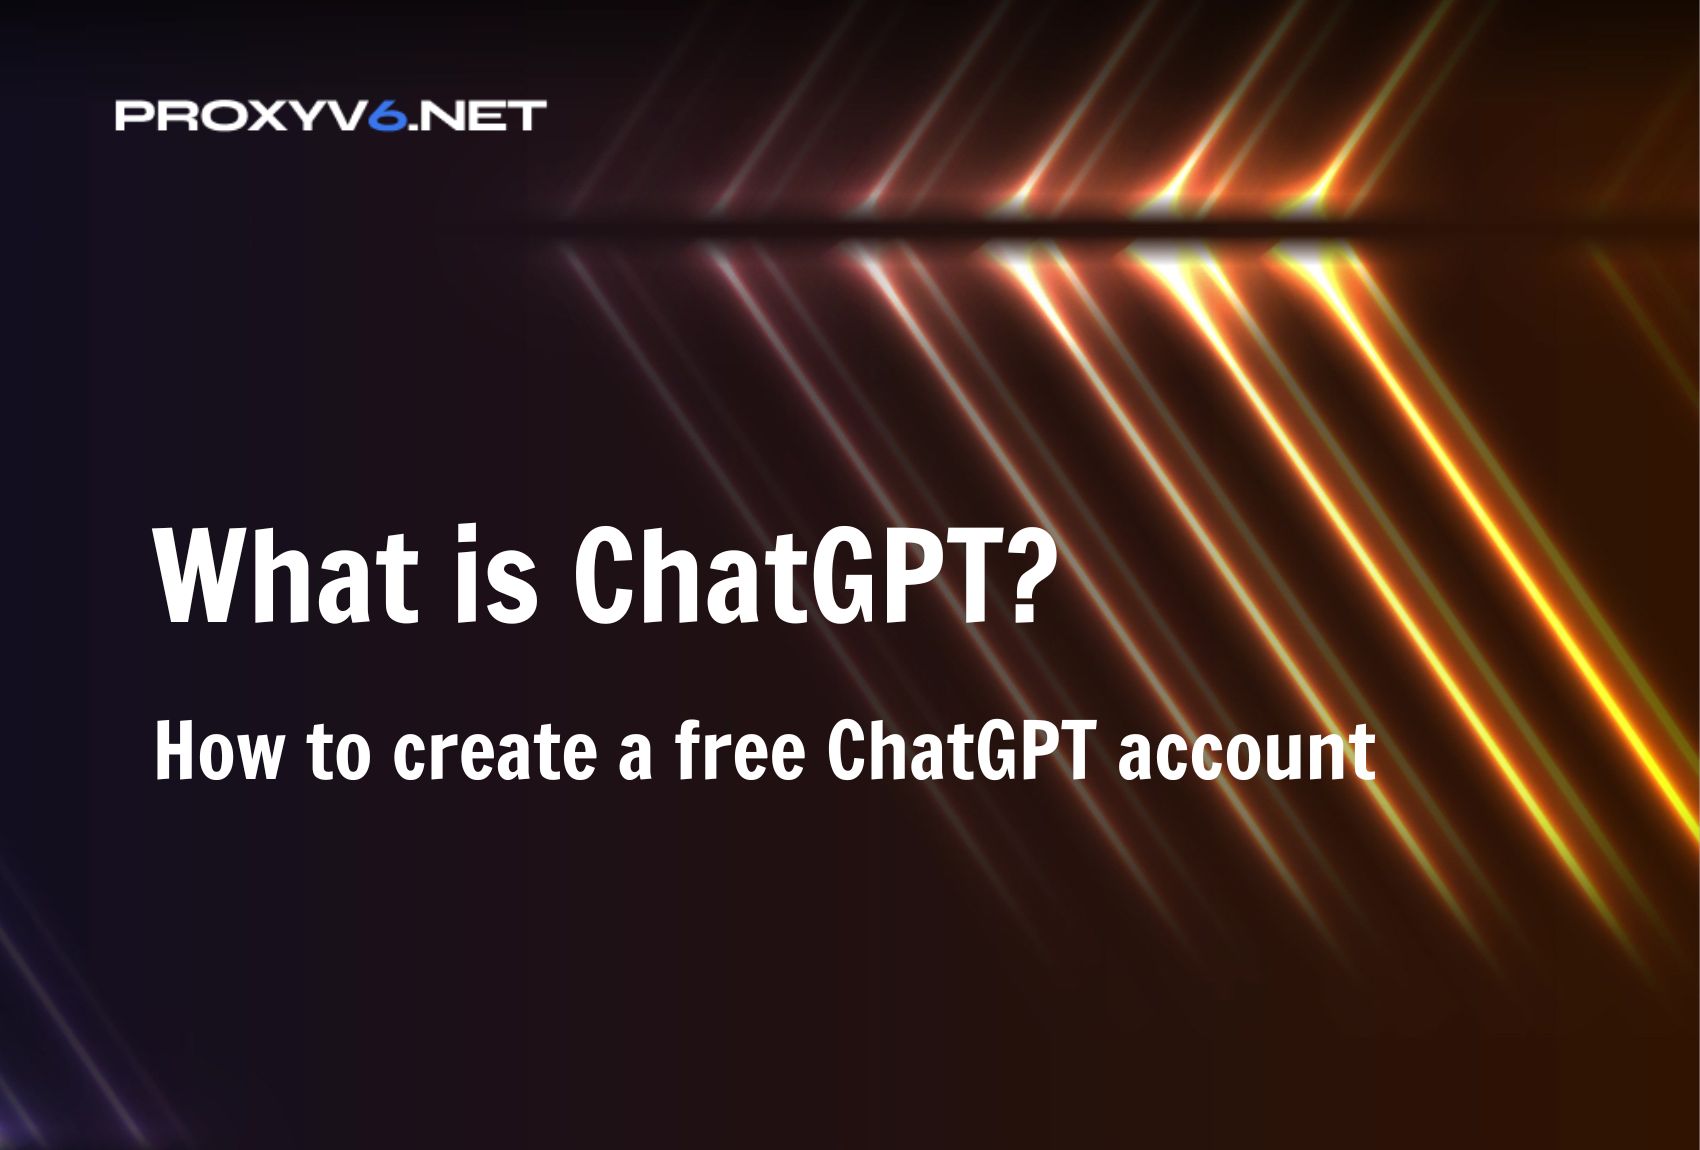 What is ChatGPT? How to create a free ChatGPT account